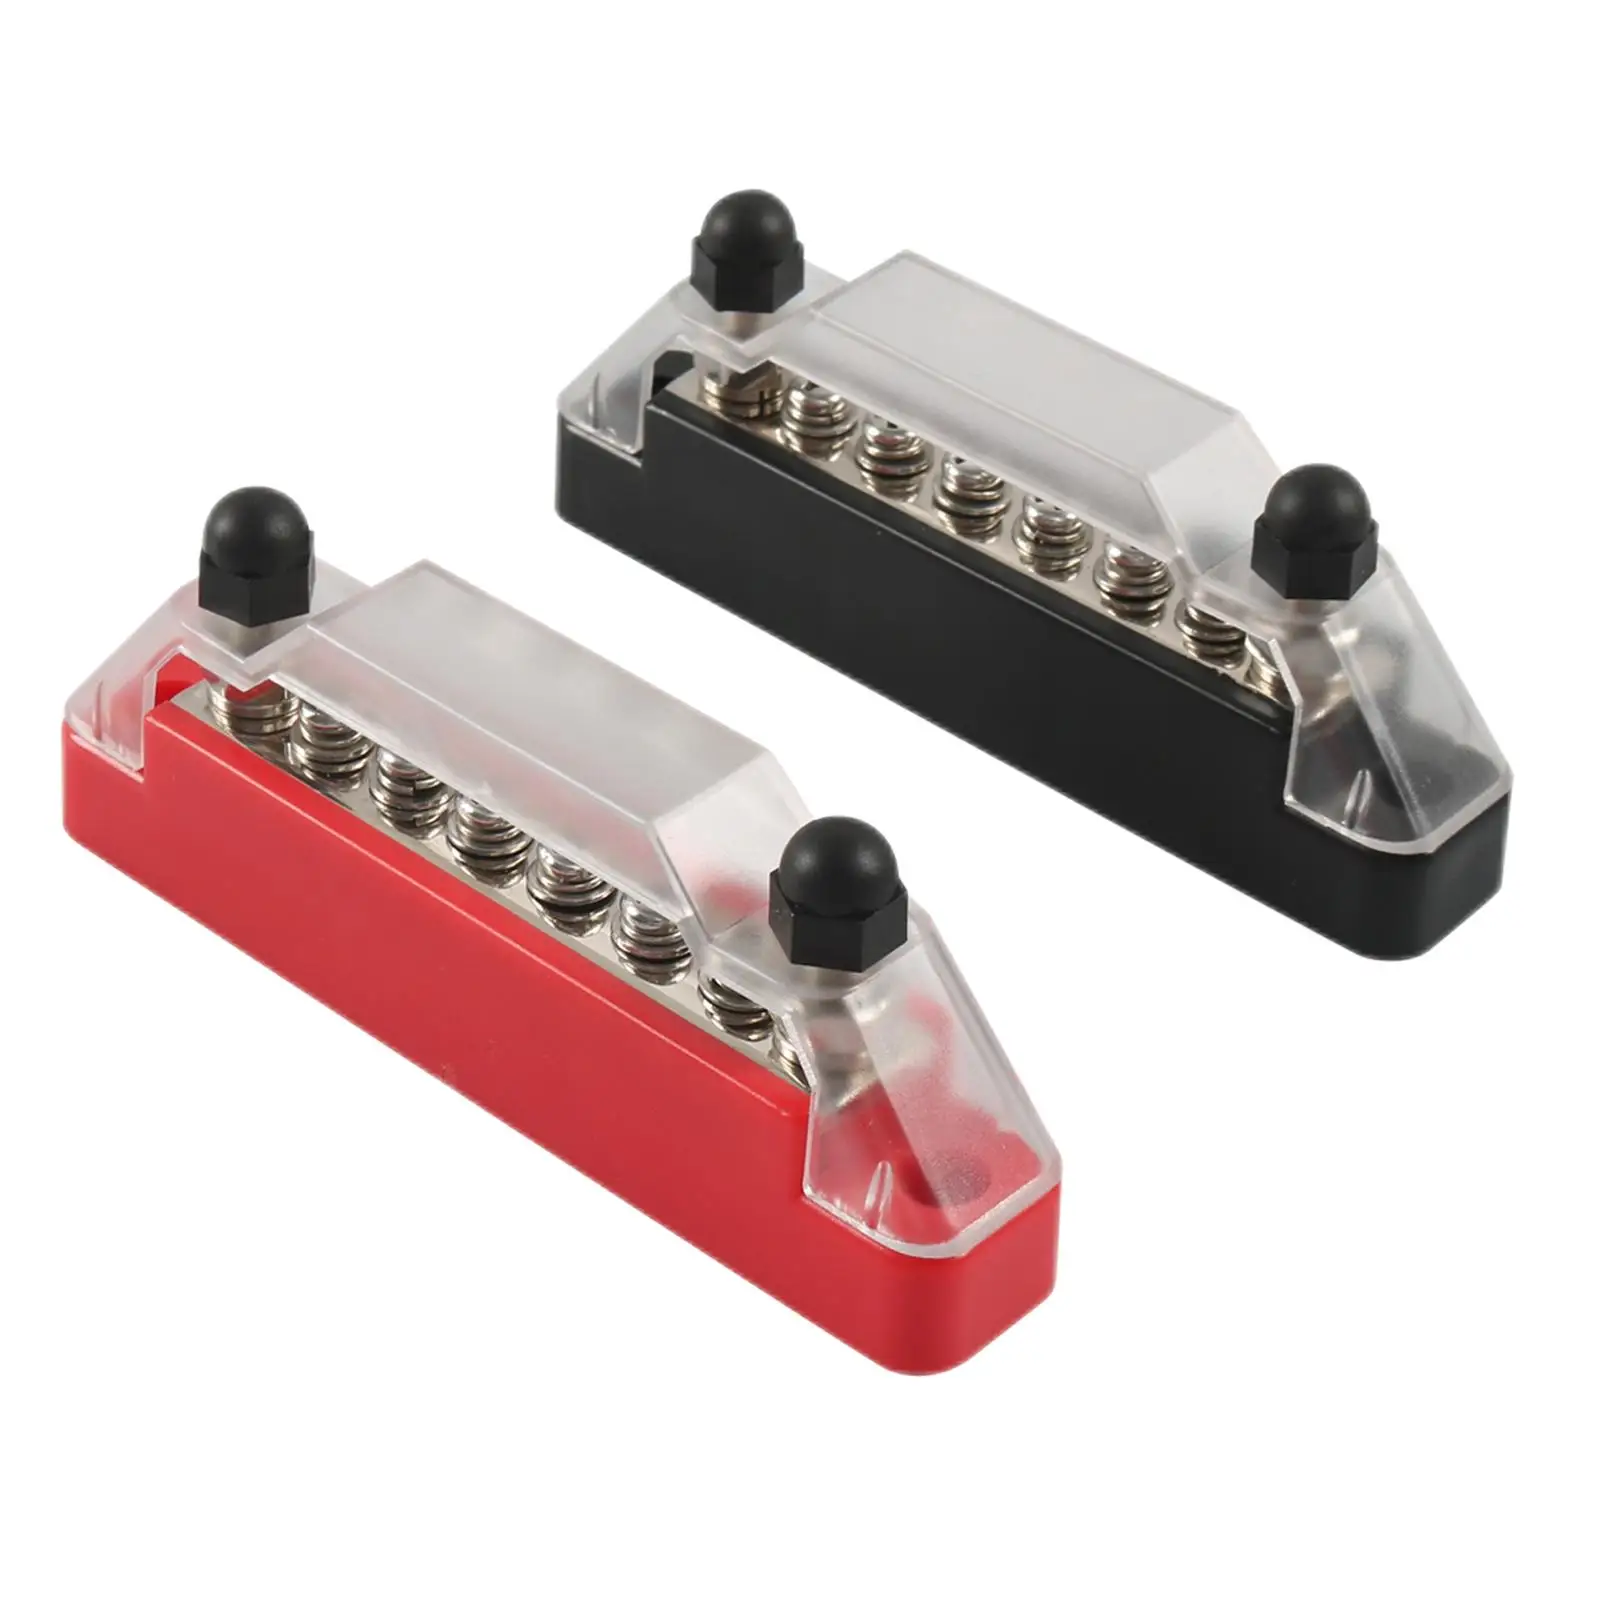 2Pcs Ground Power Distribution Block 2x M6 Studs 6x M4 Screws with Cover Bus Bar Fit for Vehicles Marine Truck Car